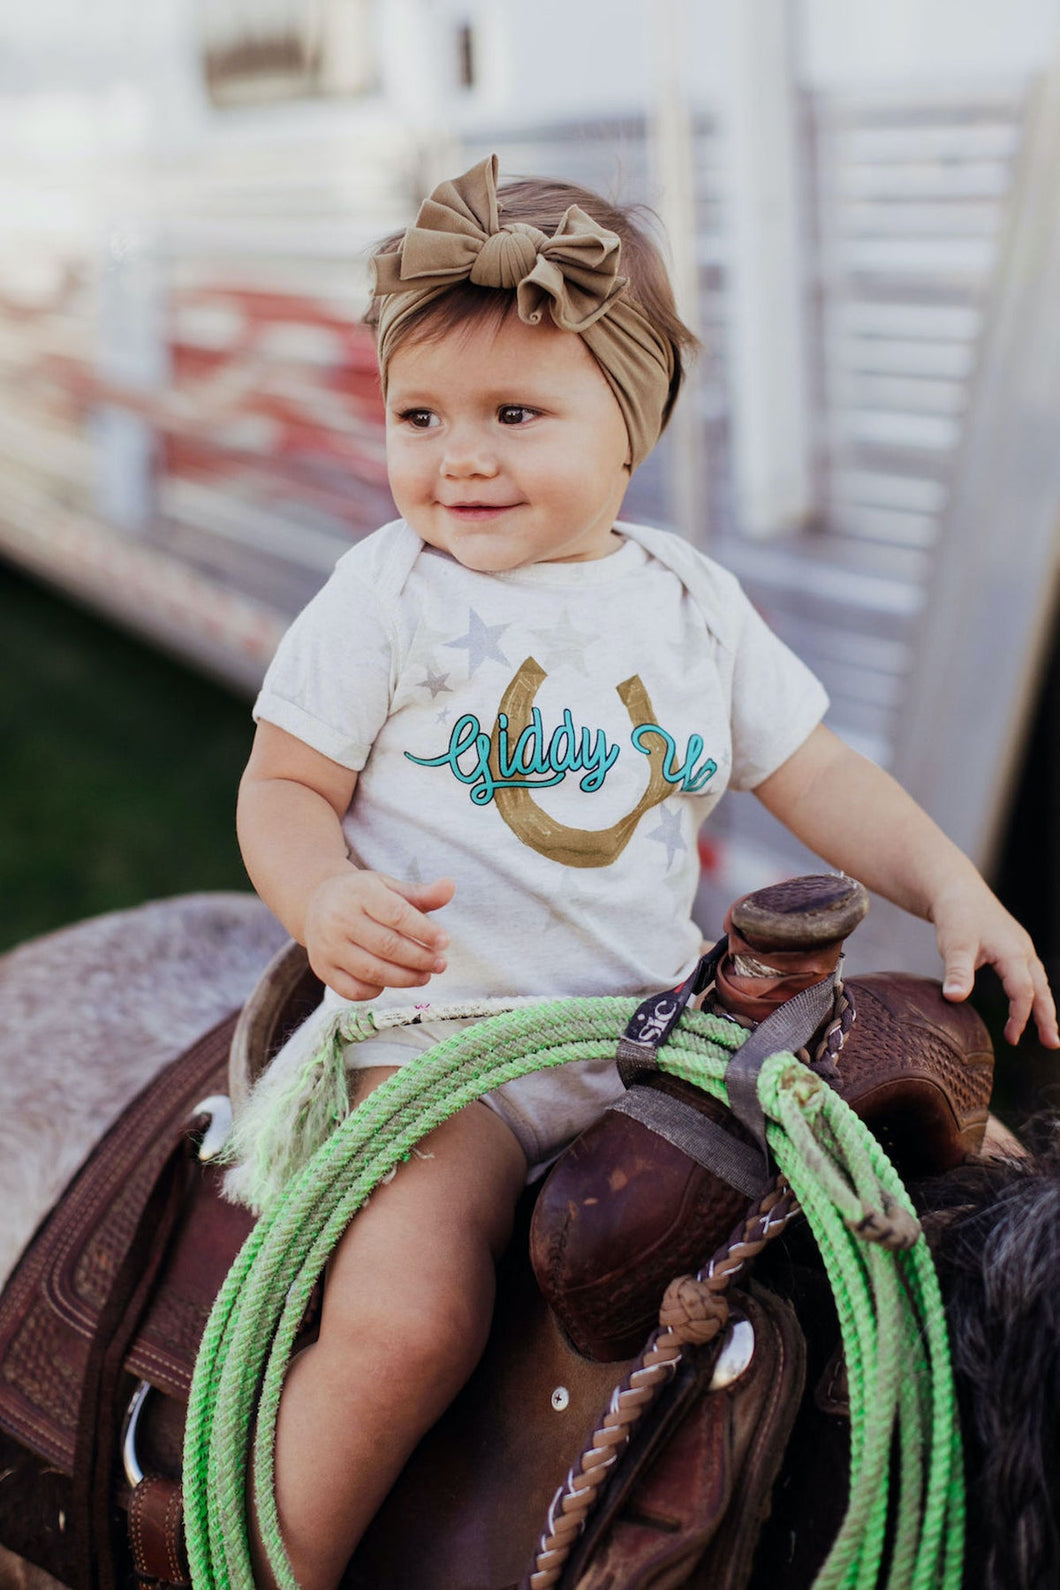 Rodeo Q Girl's Infant Giddy-Up Onesie